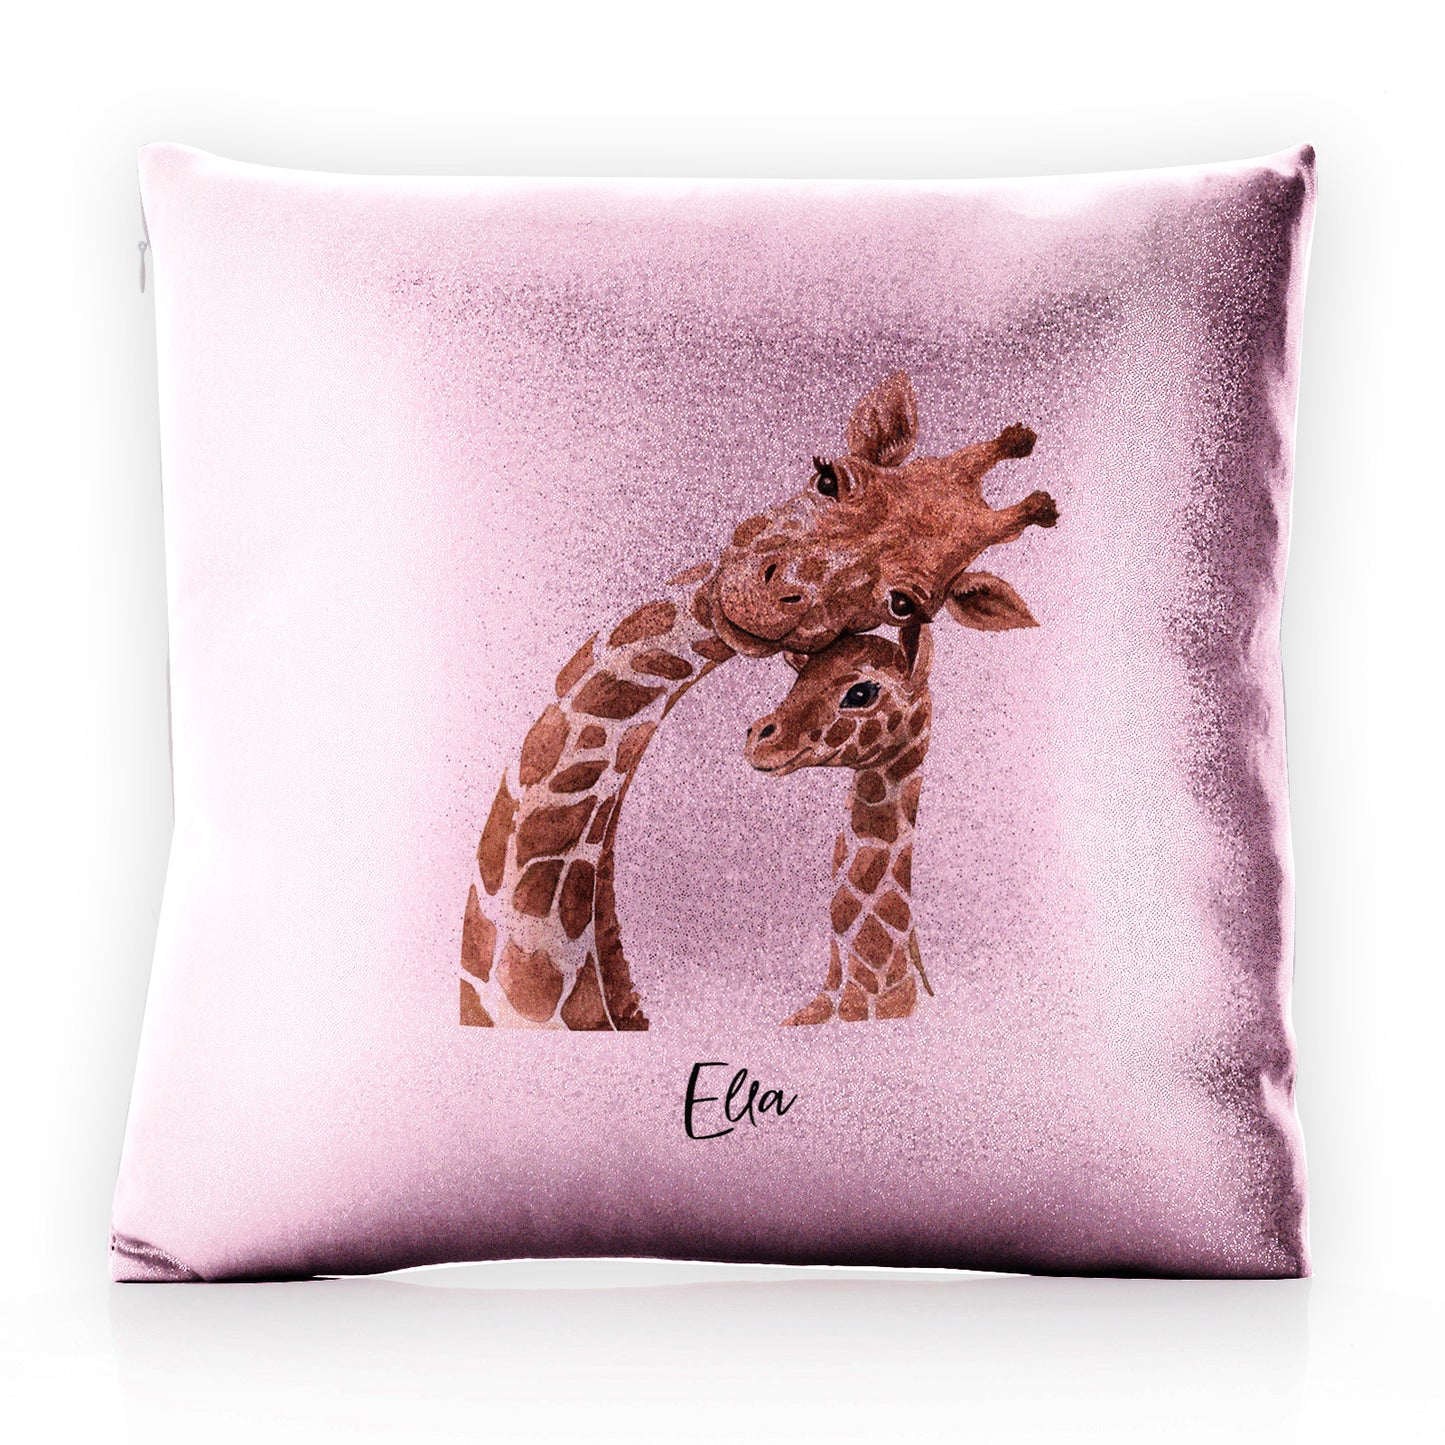 Personalised Glitter Cushion with Welcoming Text and Relaxing Mum and Baby Giraffes